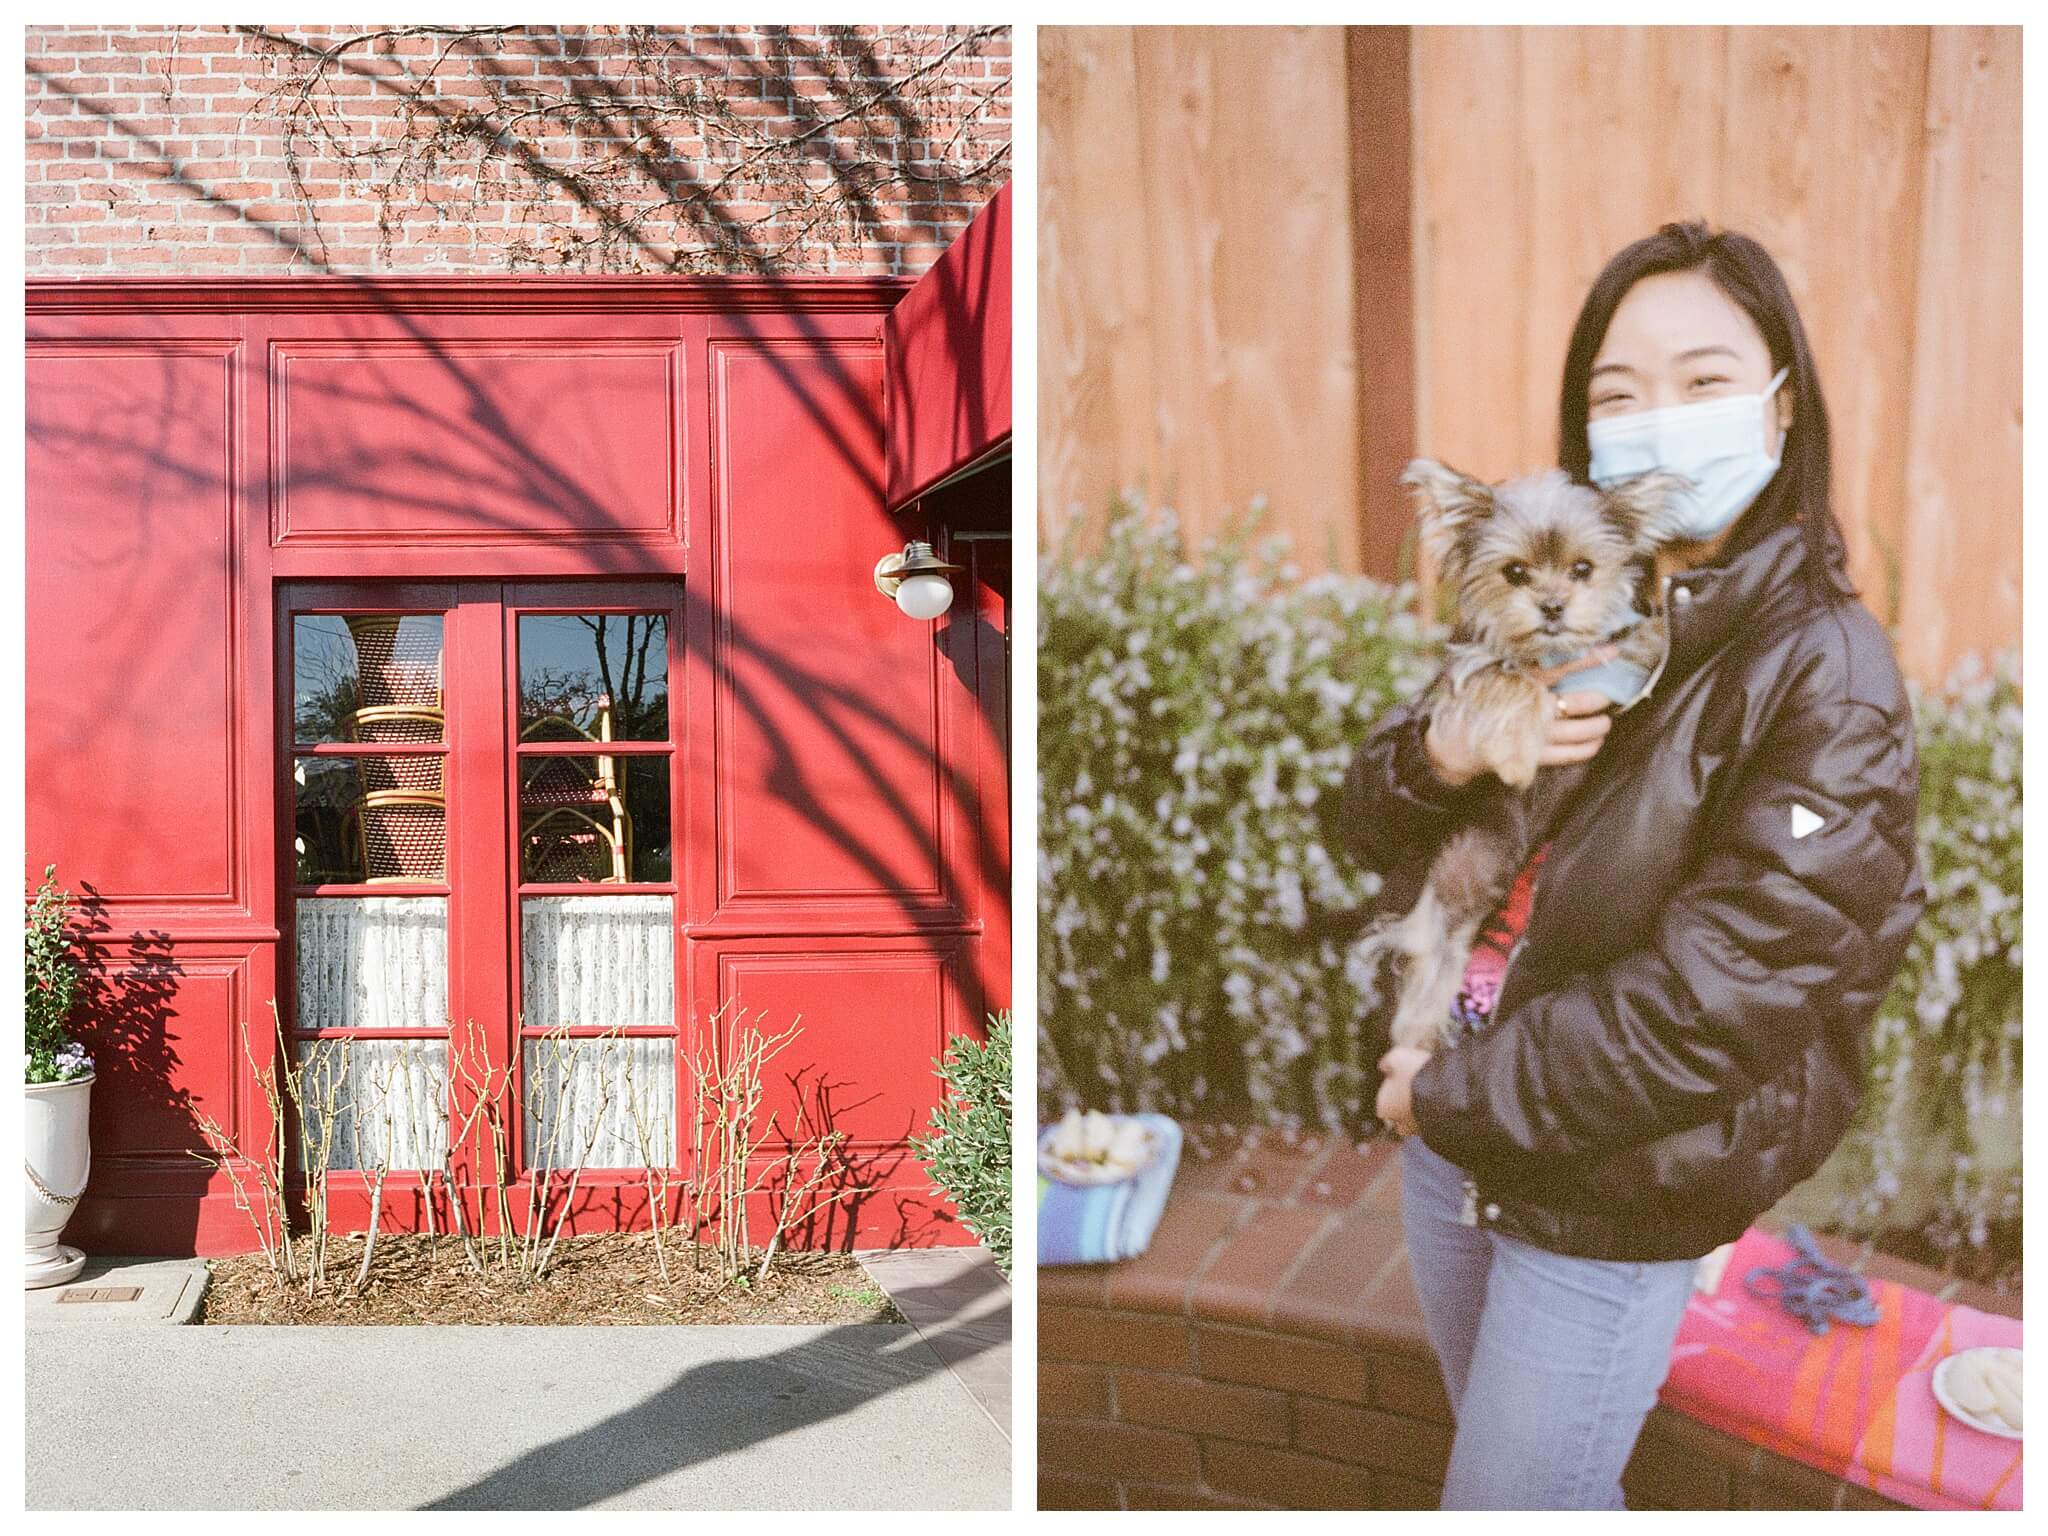 Left: The windows of the red facade of Bouchon Bistro in Yountville, California, show stacked bistro chairs and an empty restaurant in the wake of COVID. Right: A petite woman wearing a black puffer jacket and blue surgical mask smiles at the camera while holding up her dog, a shorkie.